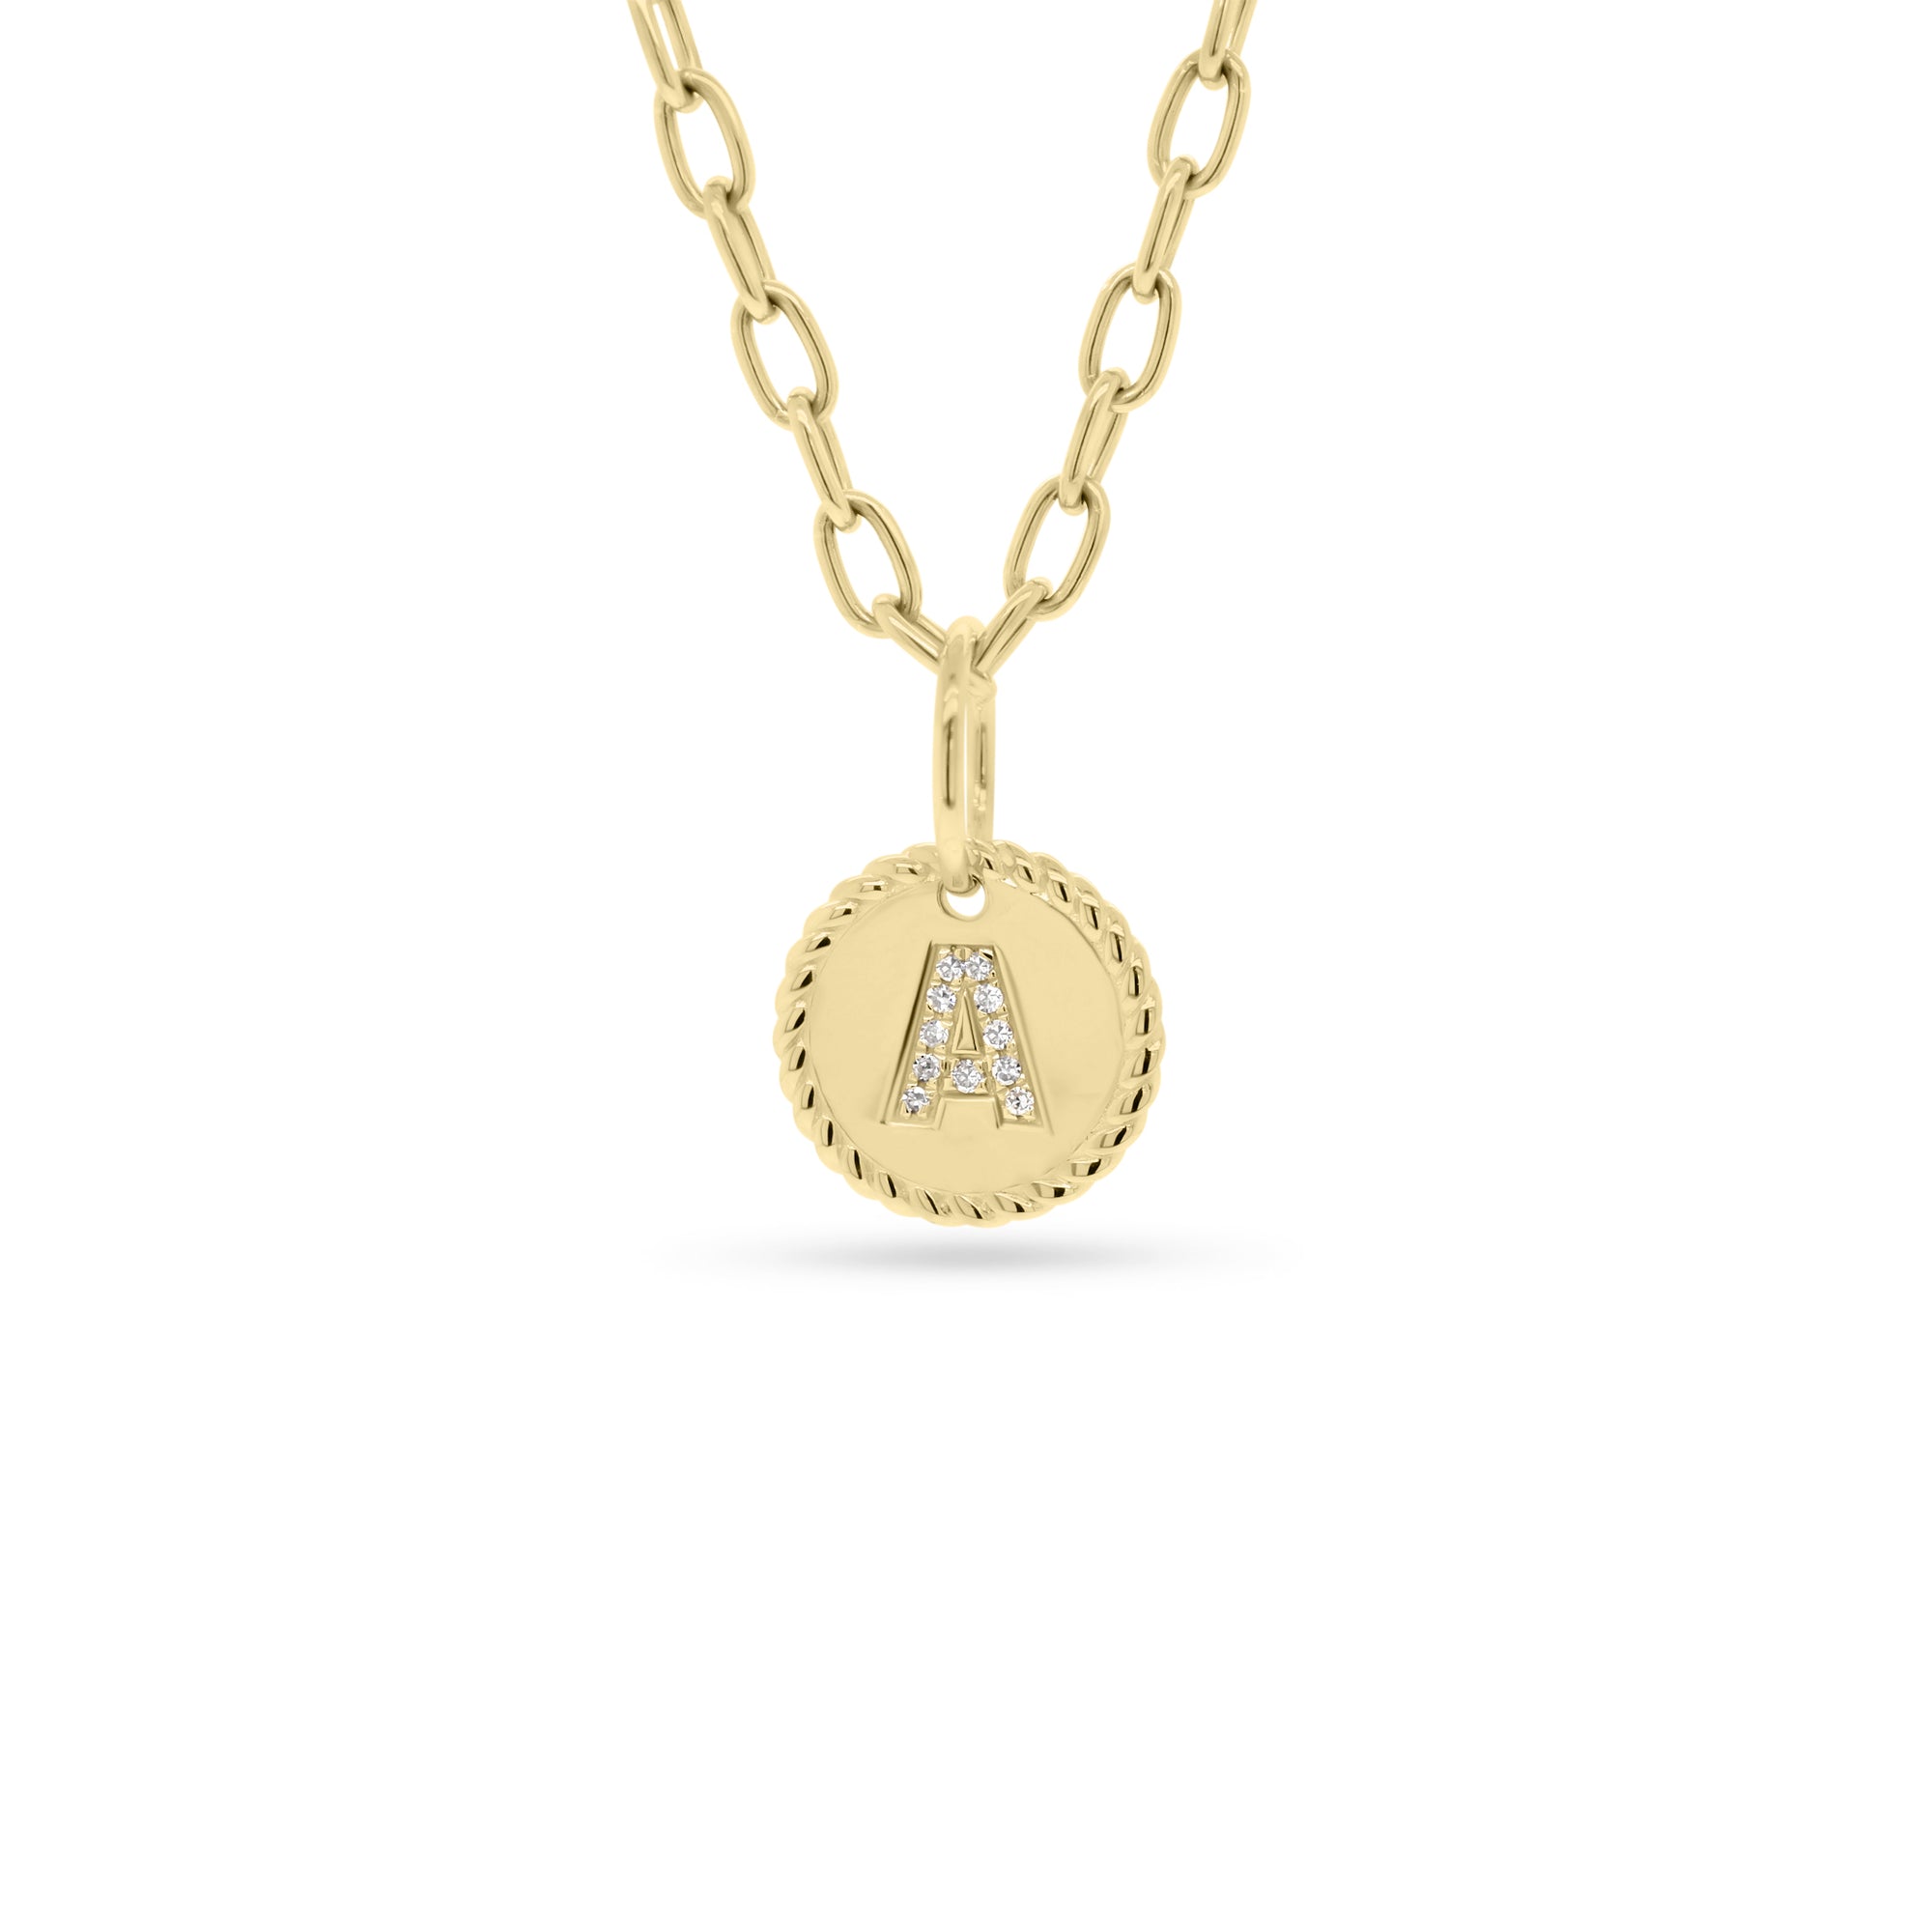 Diamond Round Initial Charm  - 14K gold weighing 1.52 grams  - 11 round diamonds totaling 0.03 carats